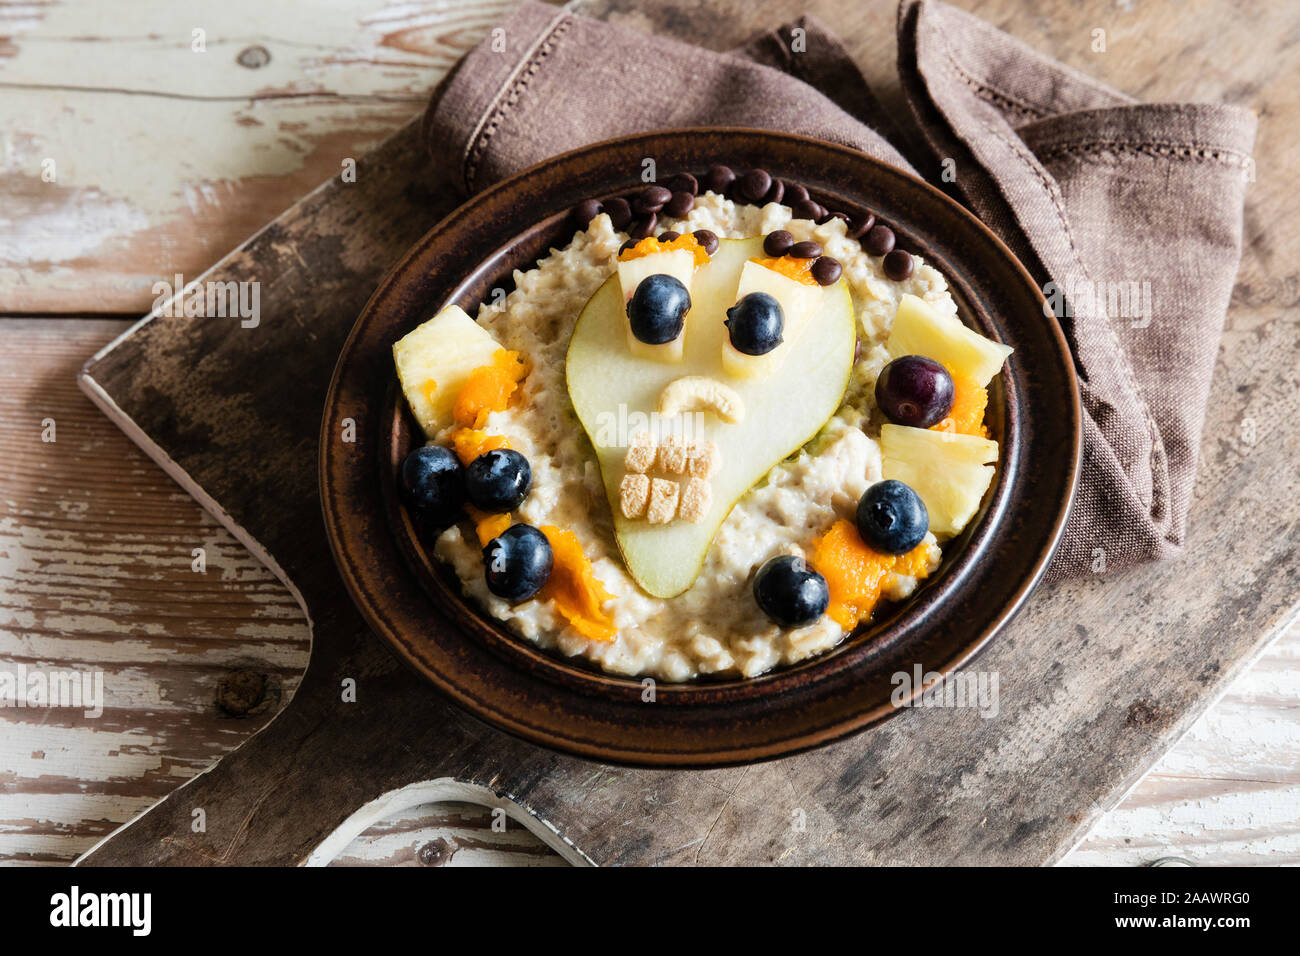 High angle view of decorated breakfast served in plate on table during Halloween Stock Photo